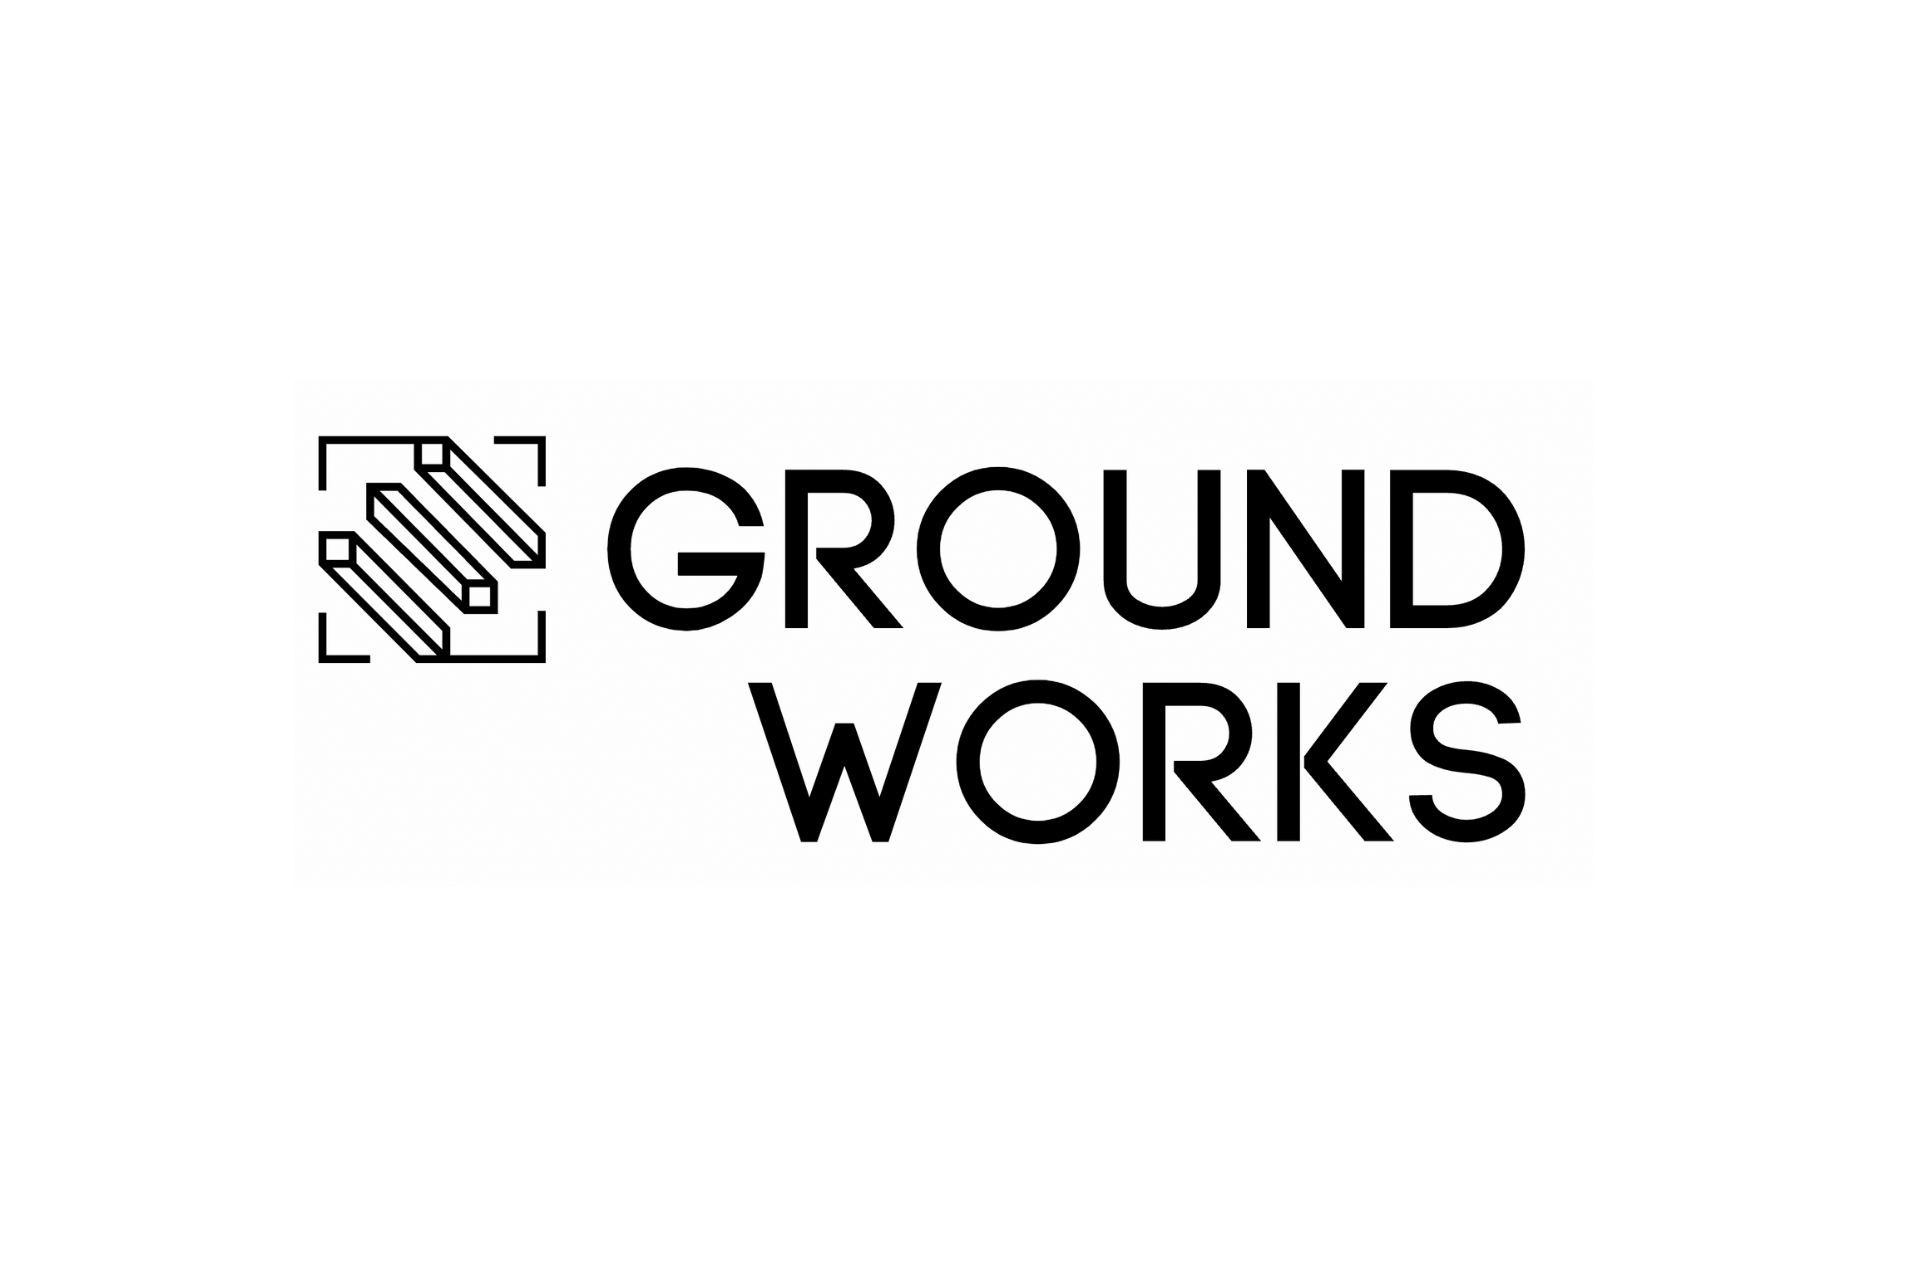 Black text that says Ground Works against a white background.